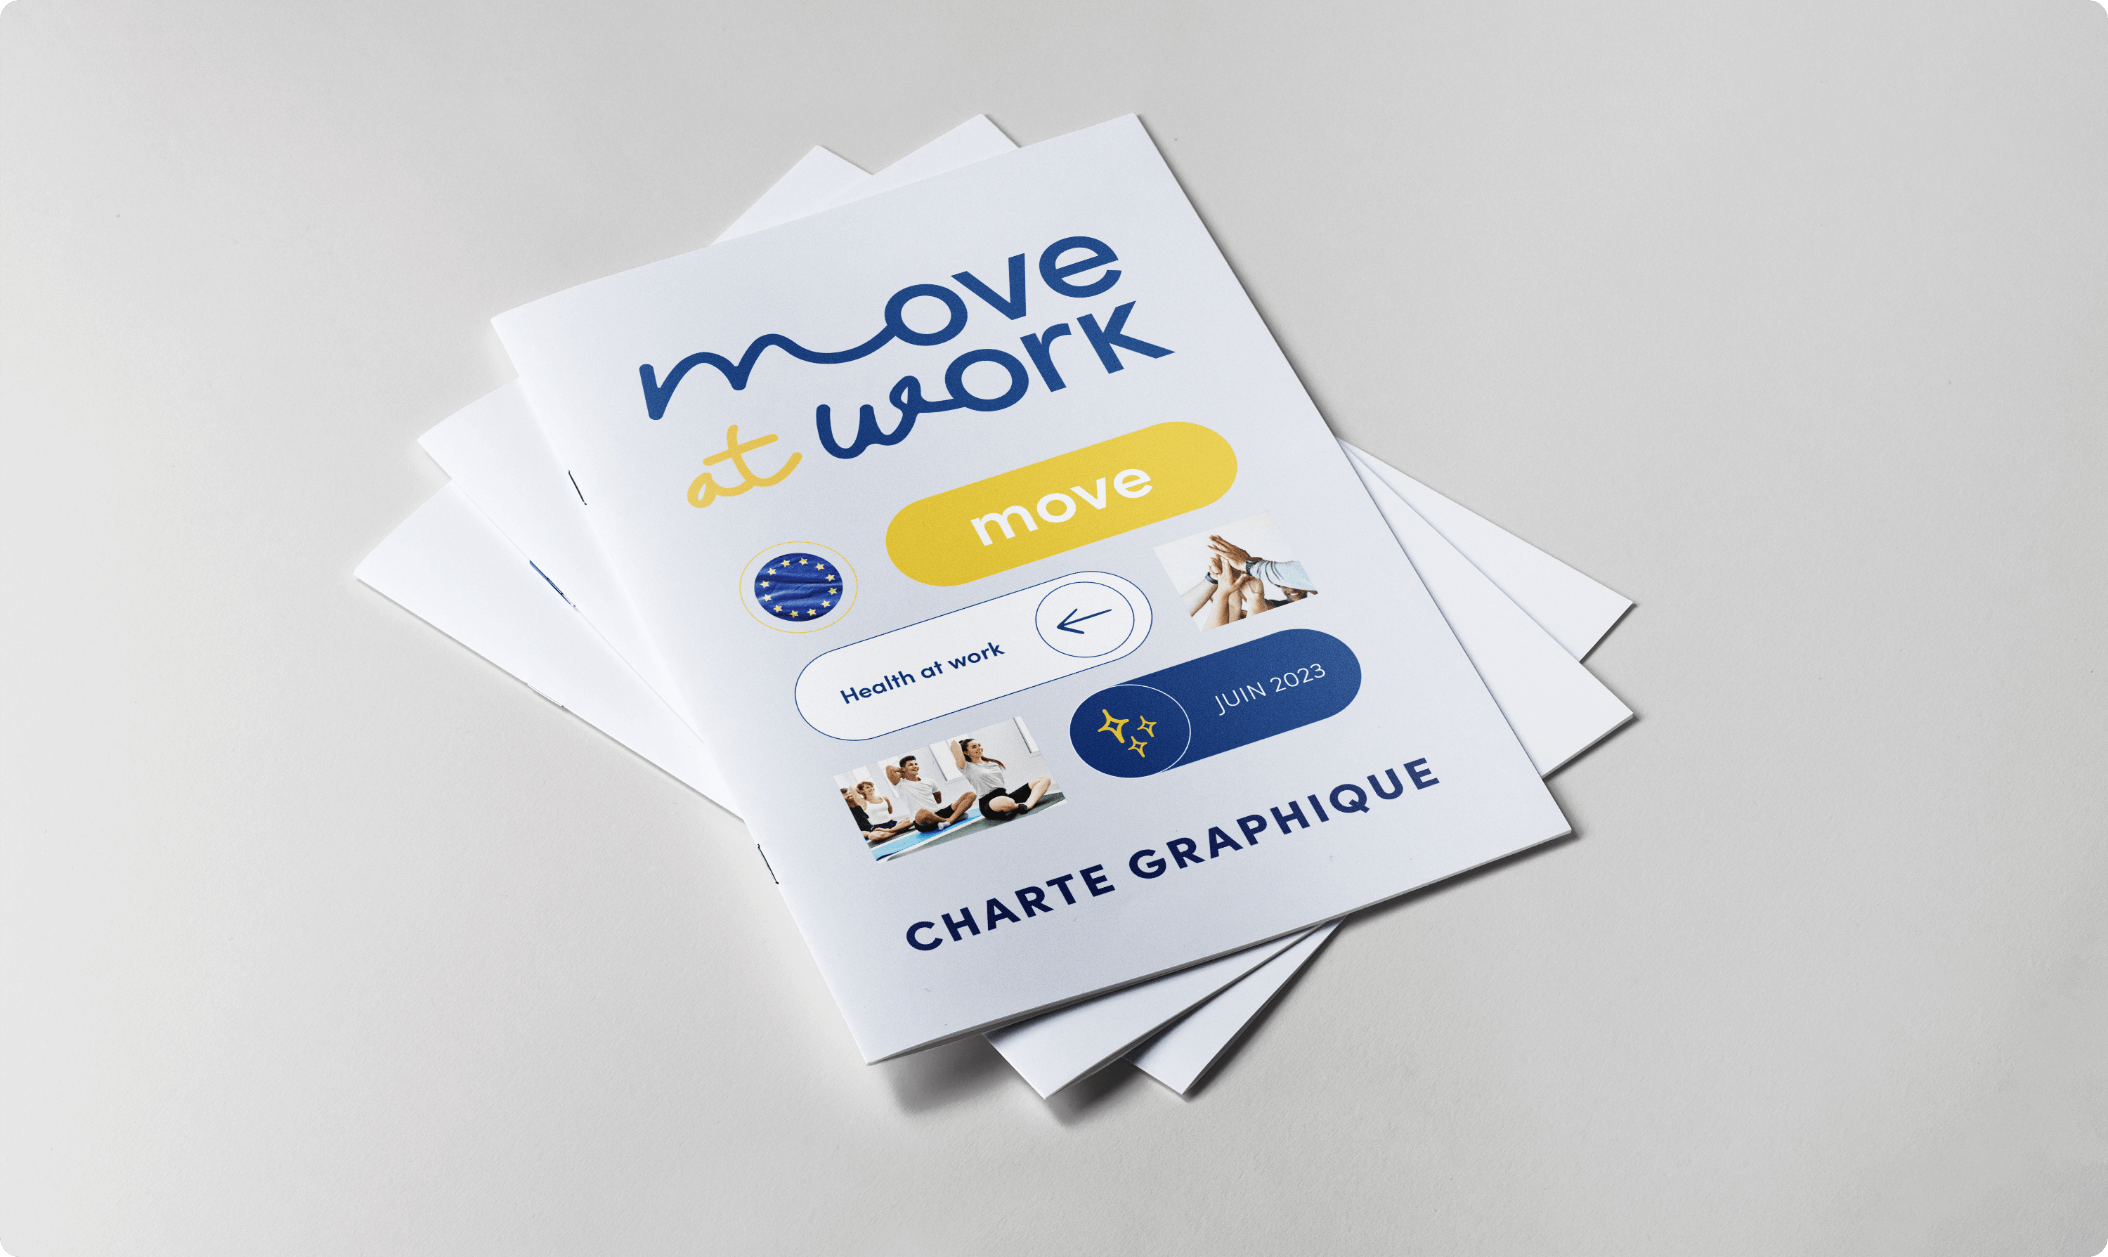 Support print Move at work - couverture charte graphique